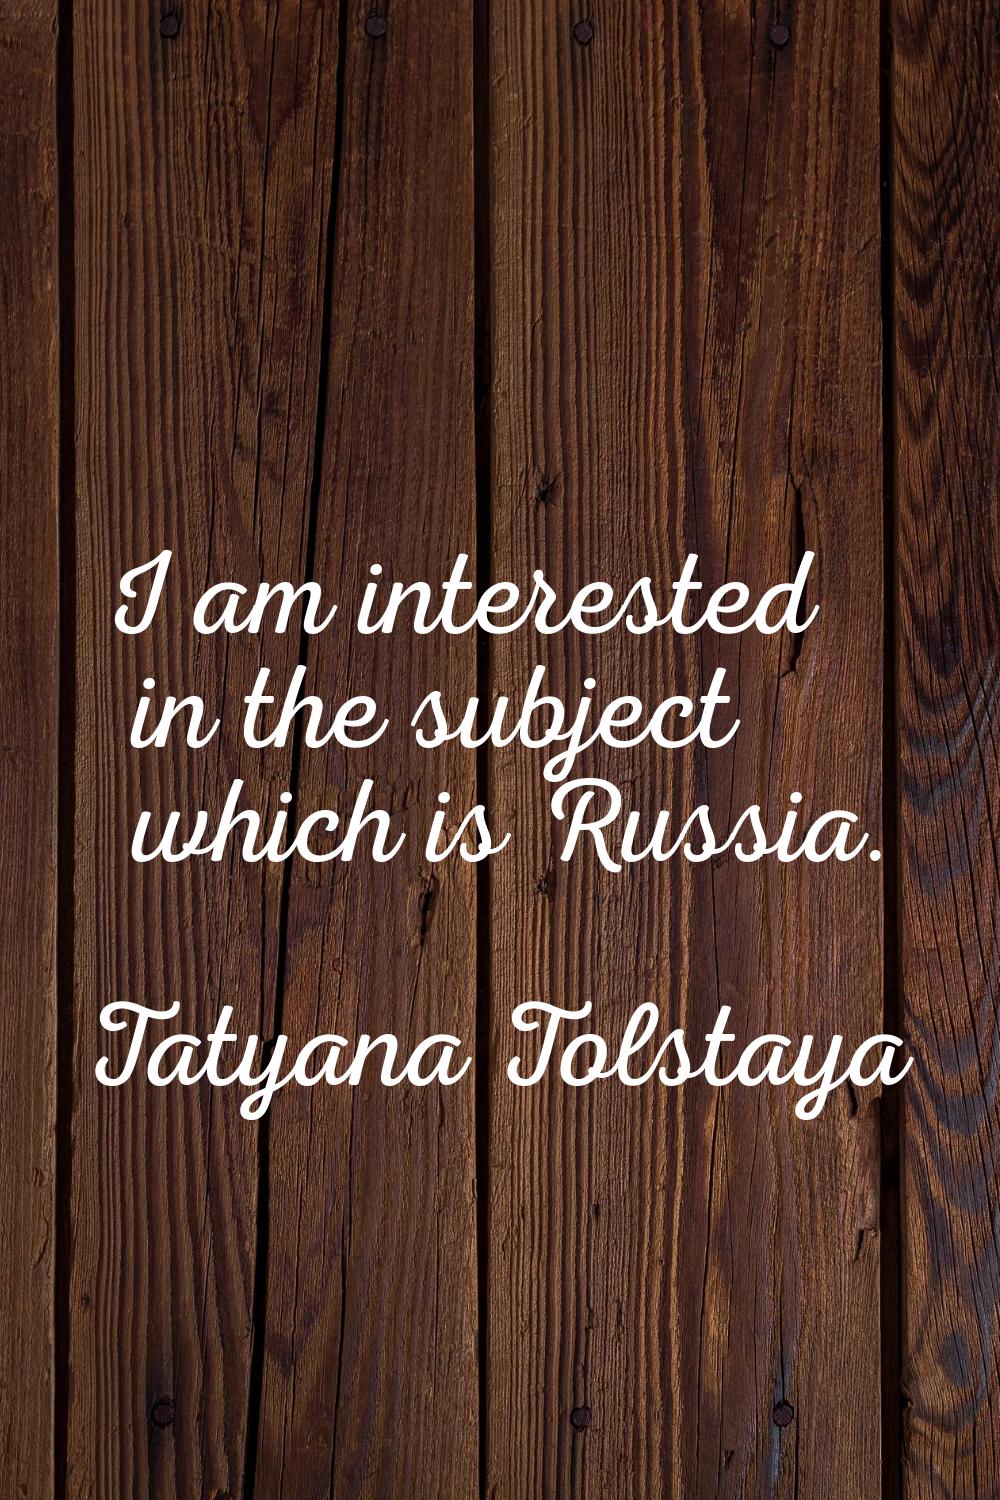 I am interested in the subject which is Russia.